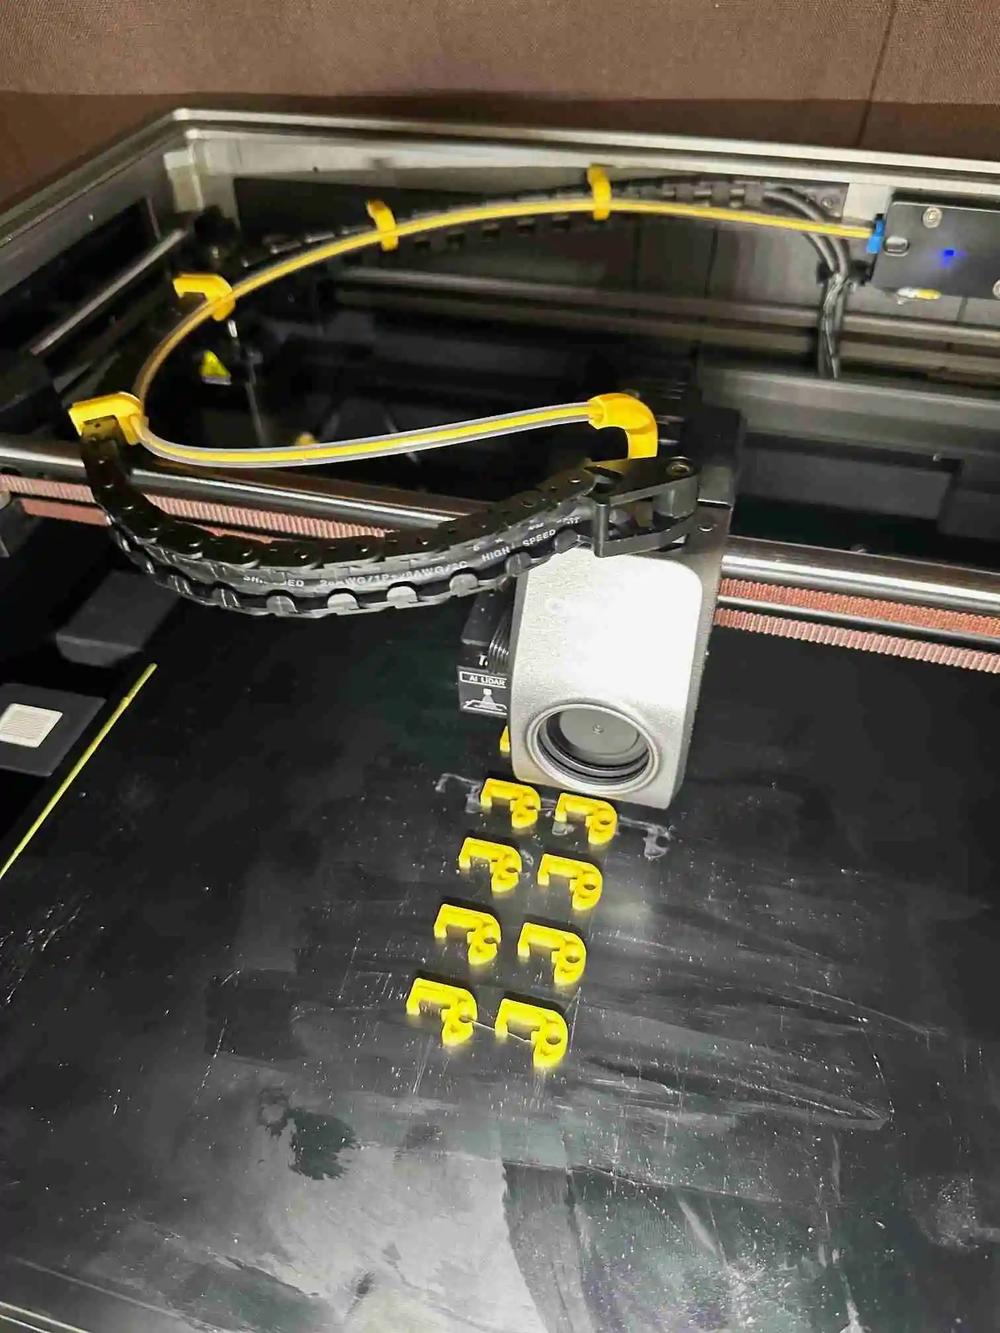 A 3D printer is printing a series of small, yellow plastic letters F.